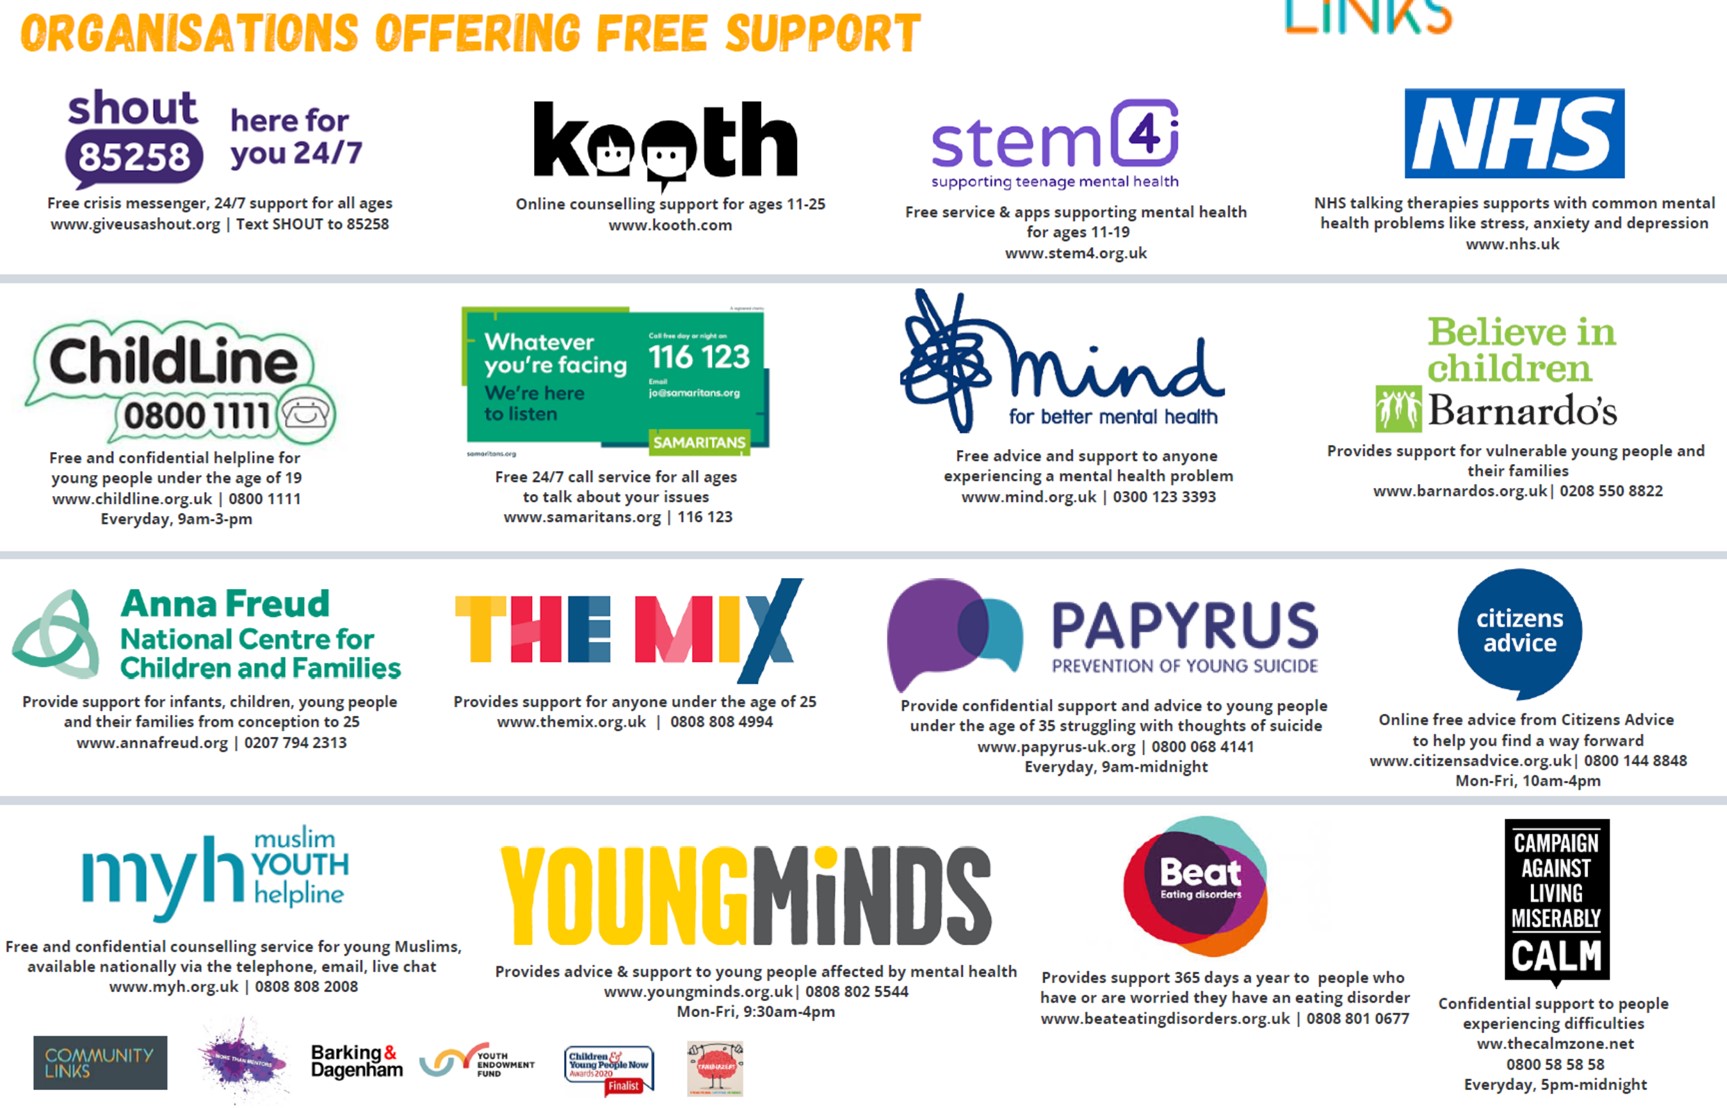 Image showing organisations offering support